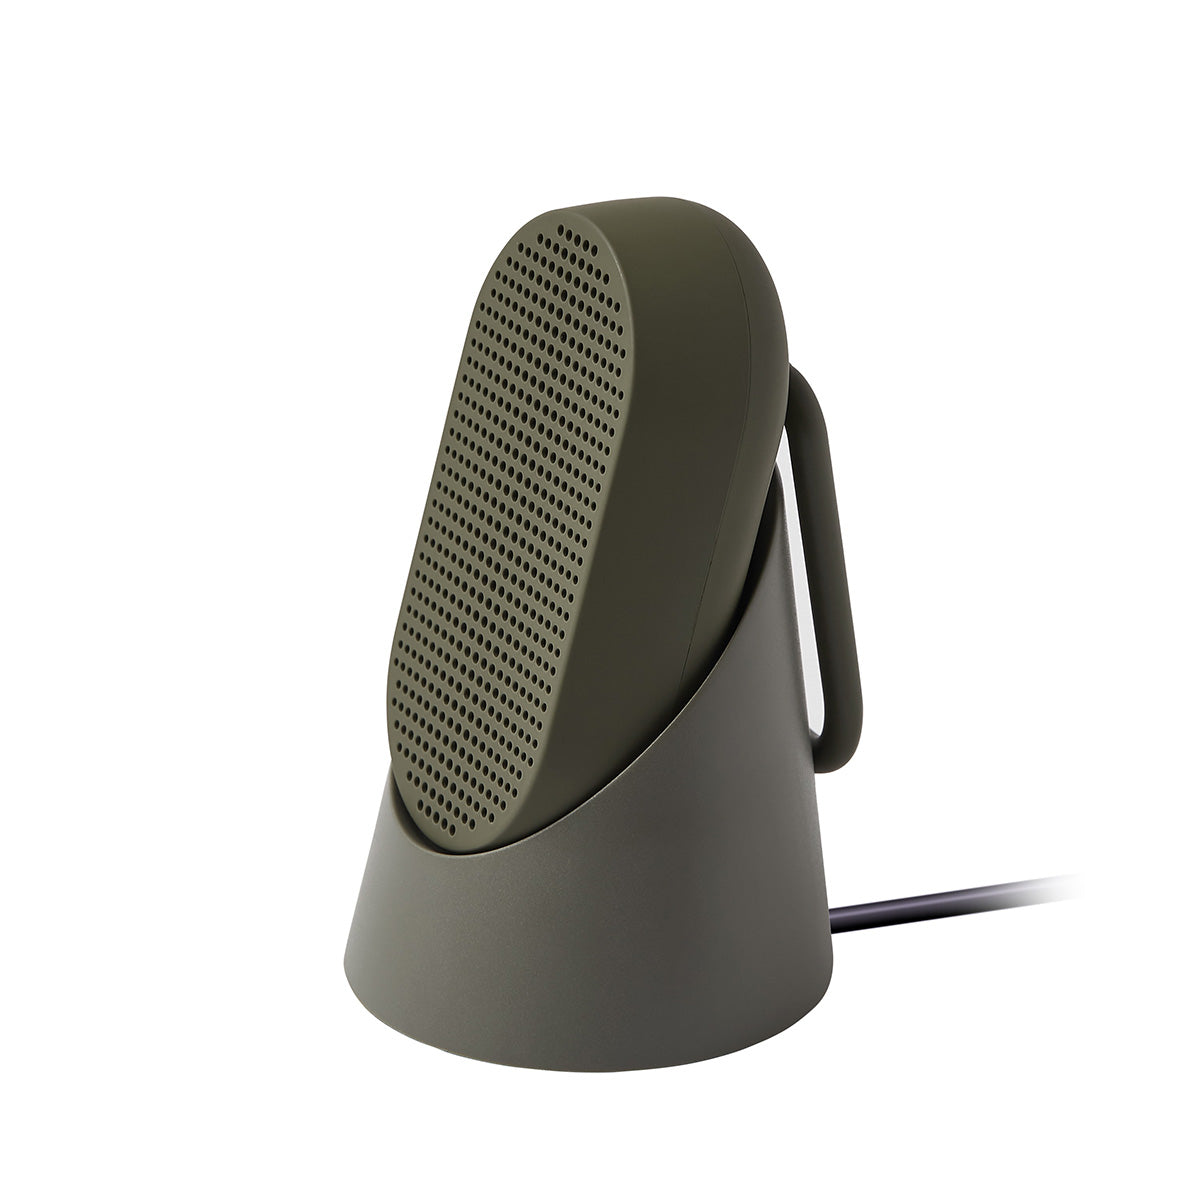 Lexon Mino T - Bluetooth® speaker with integrated carabiner